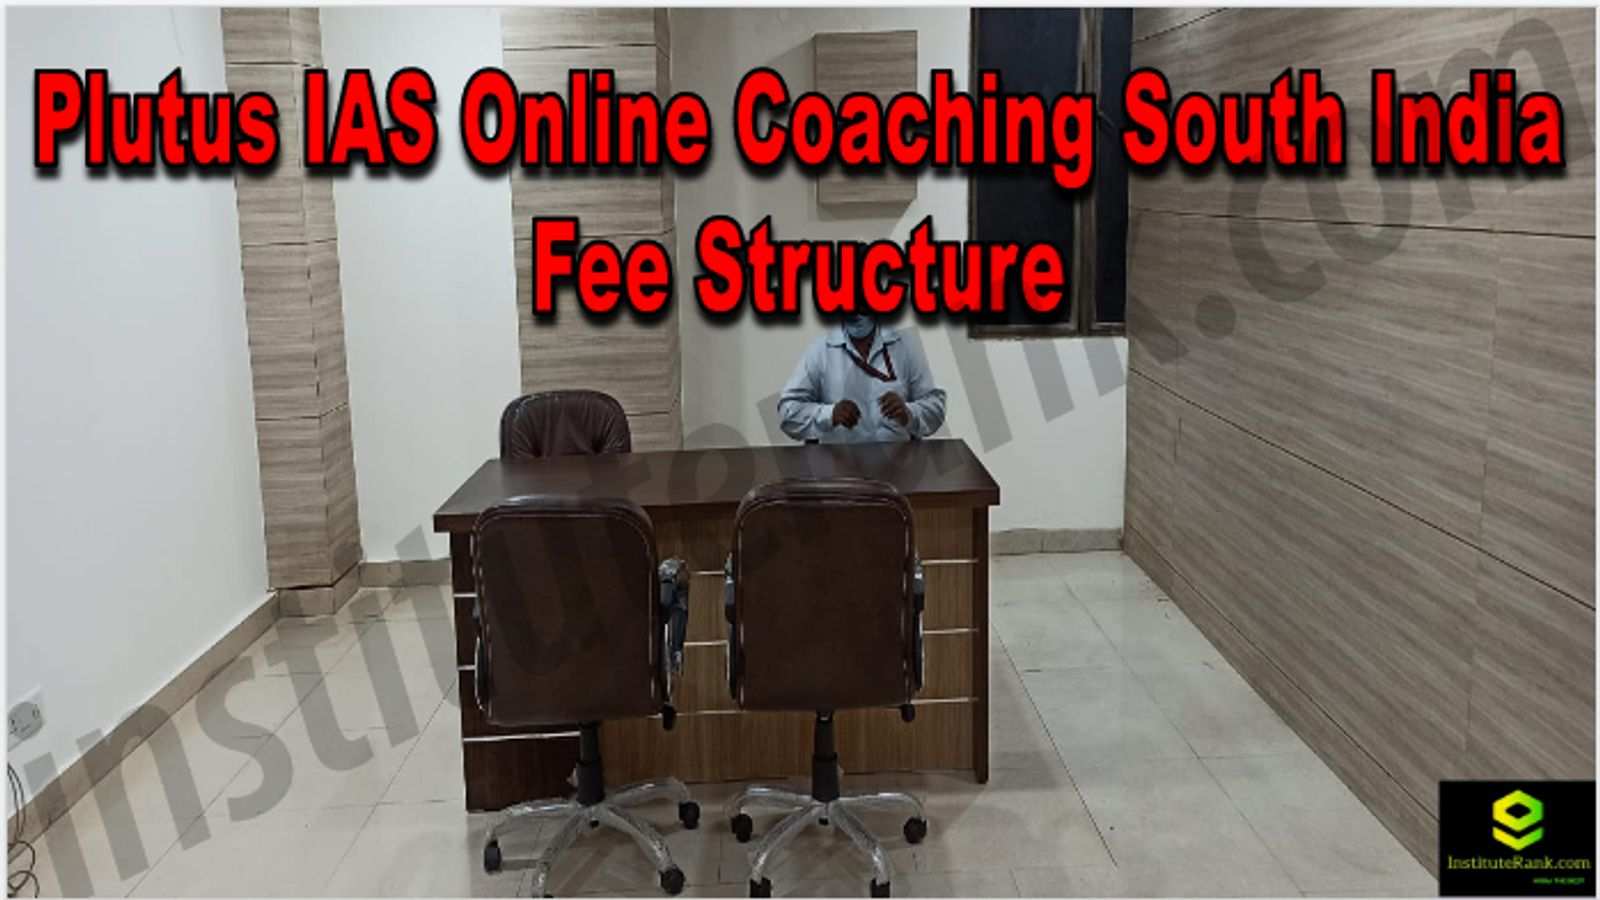 Plutus IAS Online Coaching South India Reviews Fee Structure